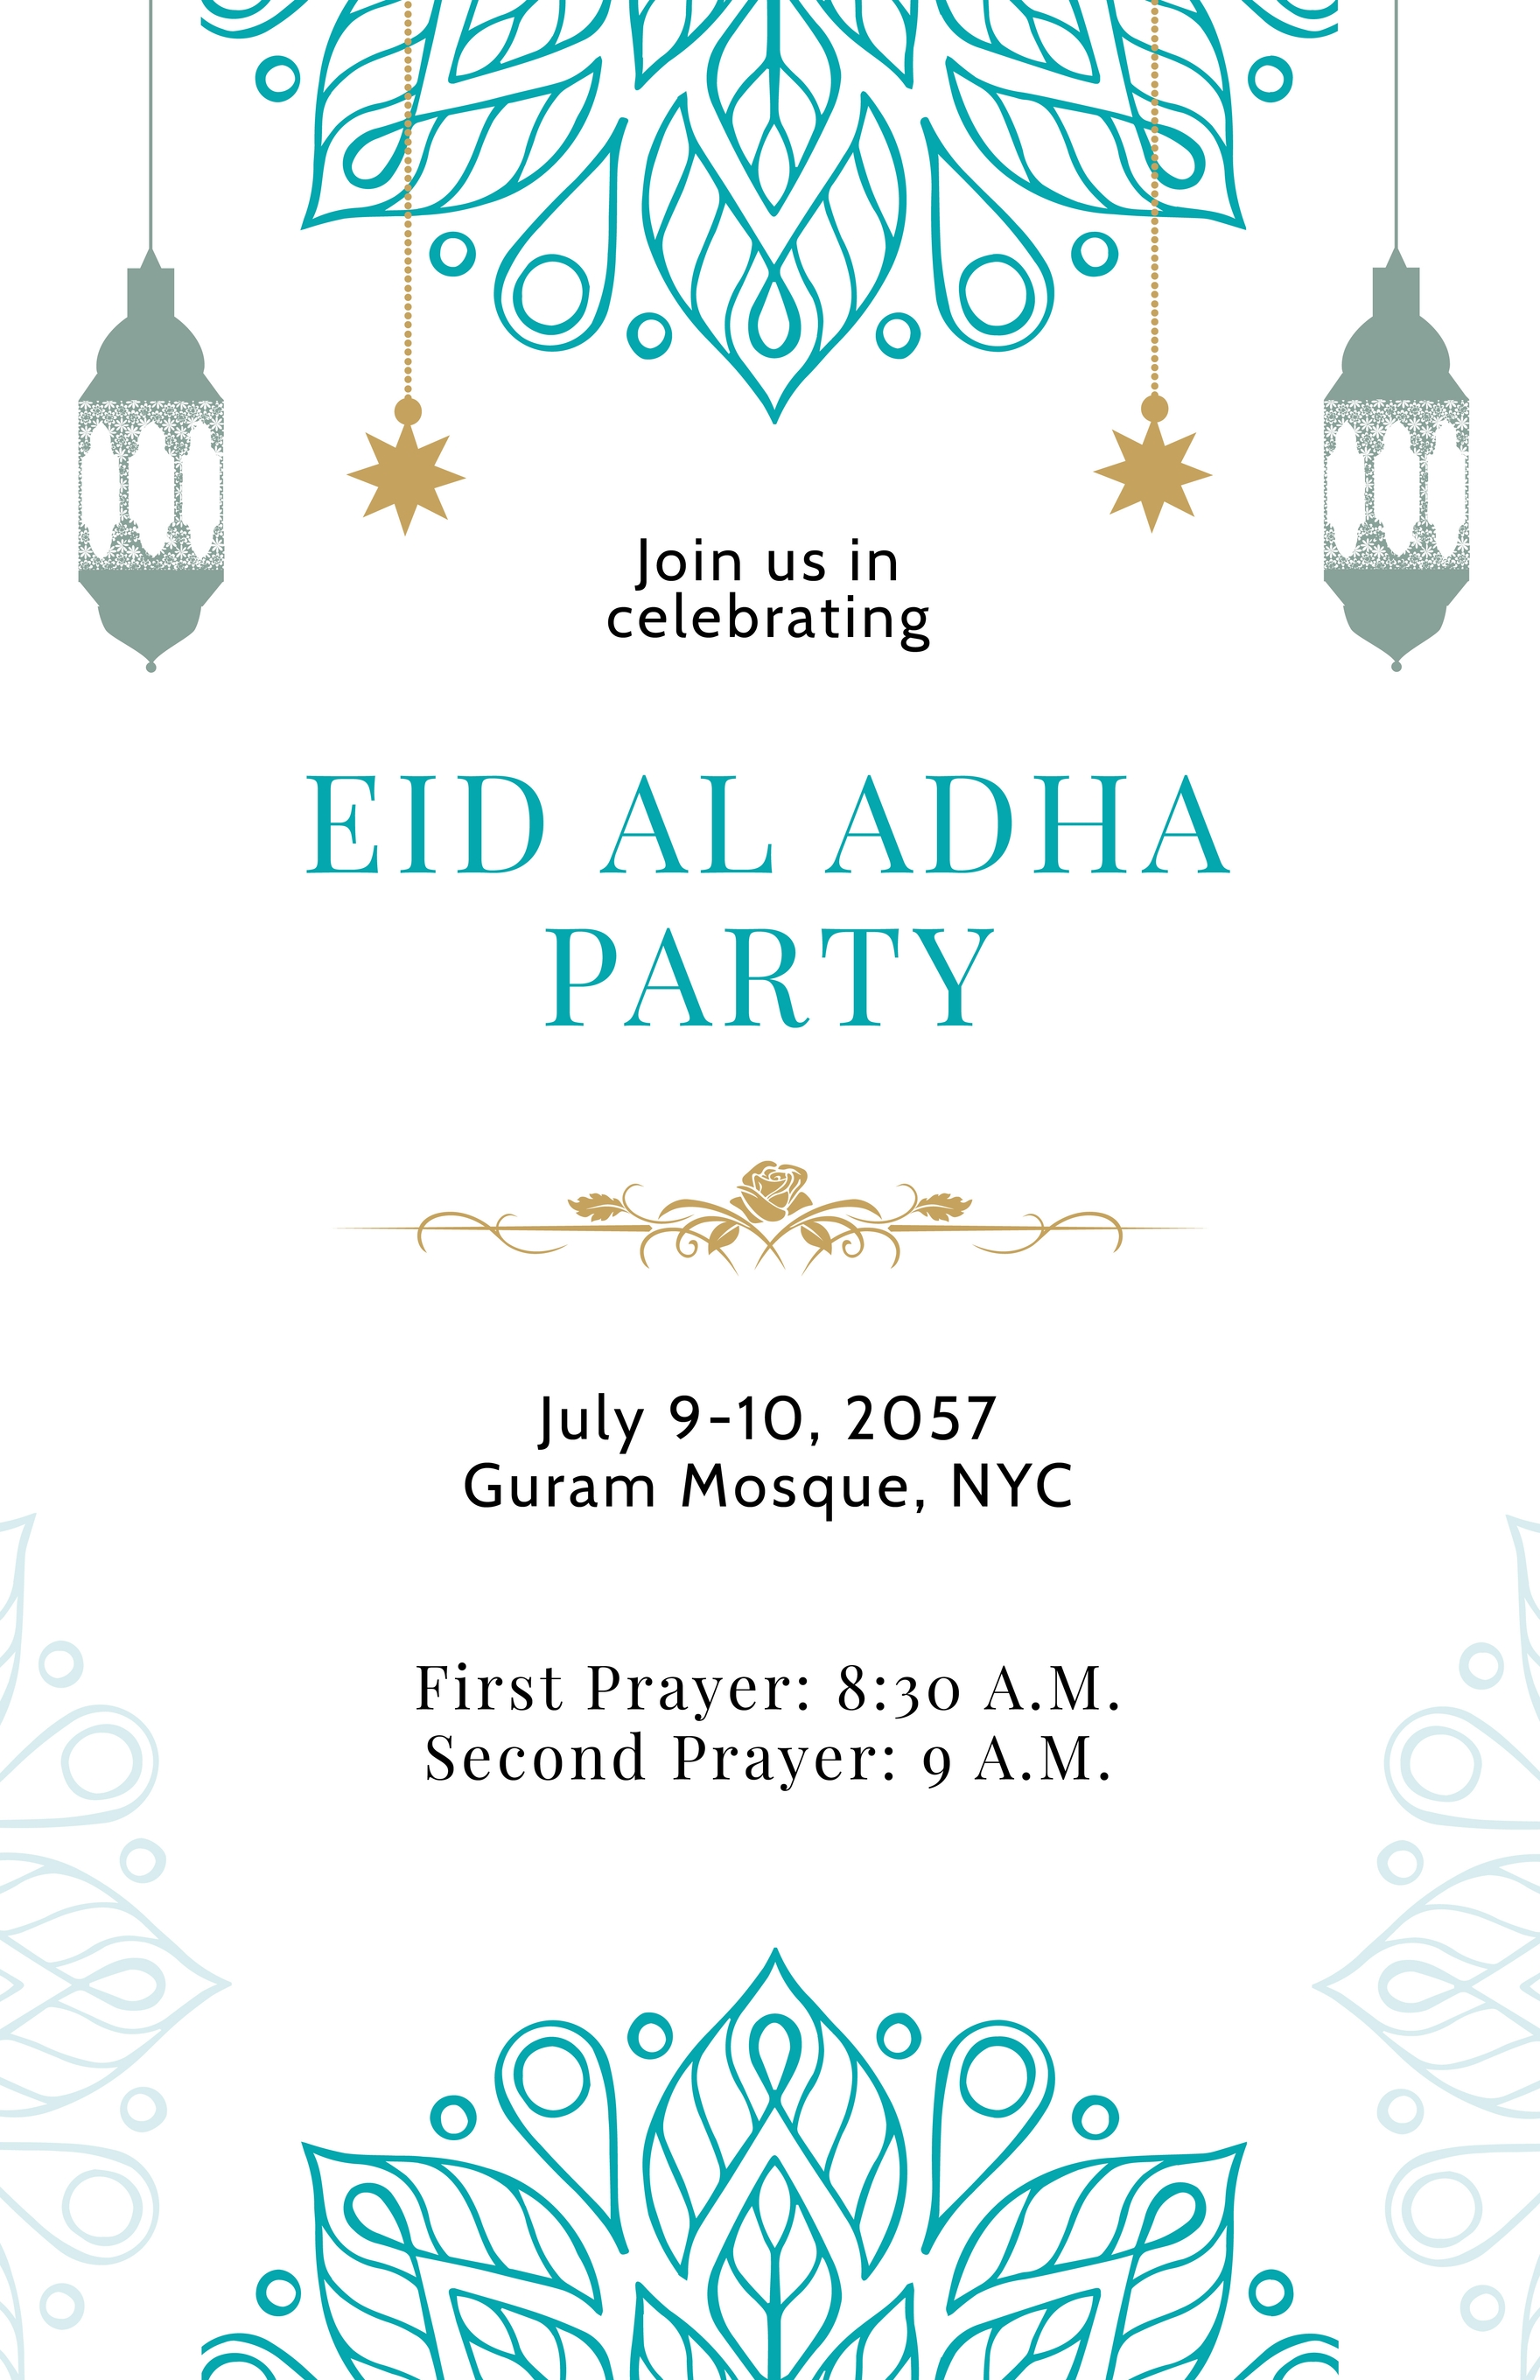 Free Eid Al Adha Party Poster in Word, Google Docs, Illustrator, PSD, Apple Pages, Publisher